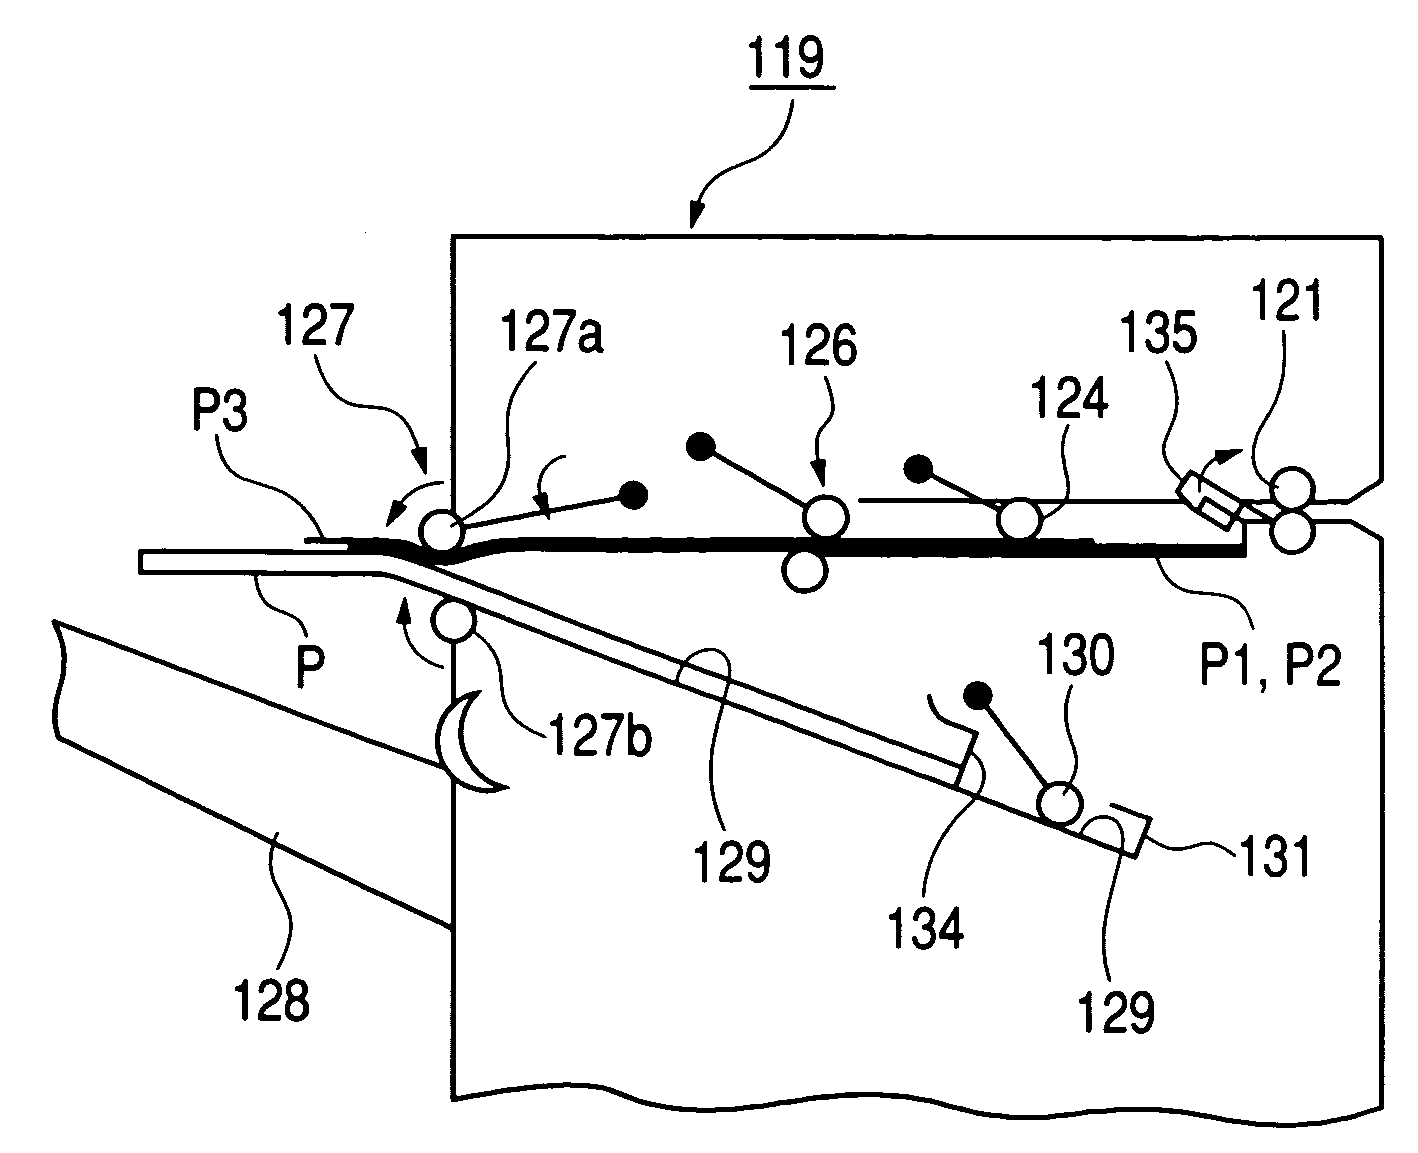 Sheet processing apparatus with buffer for sheet finisher